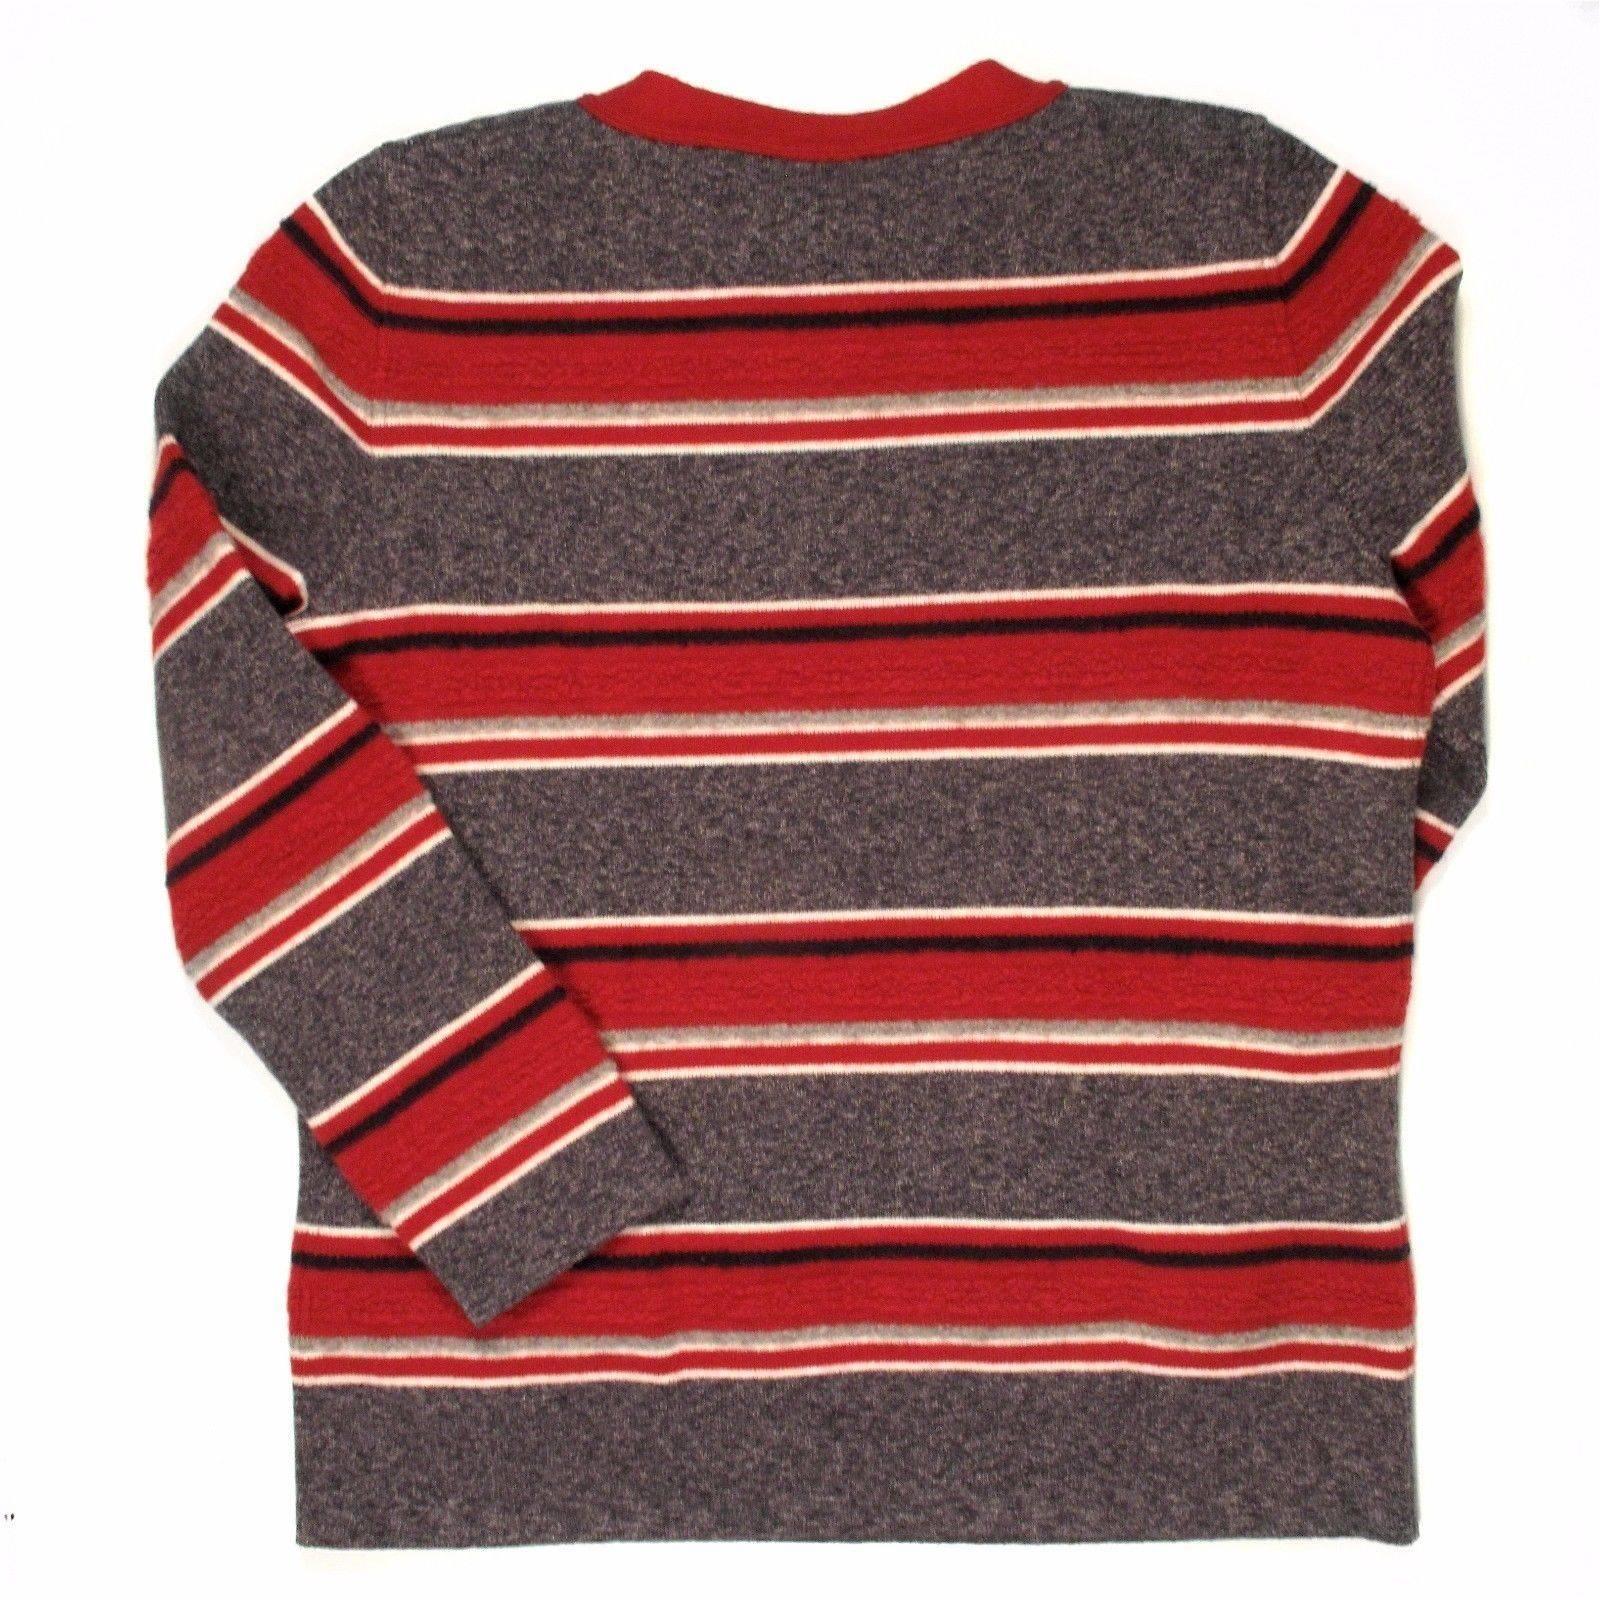 Size:  US 10 - 42

Color:  Red - Gray - White

Material: 100% Cashmere

------------------------------------------------------------

Details:

- varying sized stripes throughout

- some textured fabric

- adjustable bow at collar

-